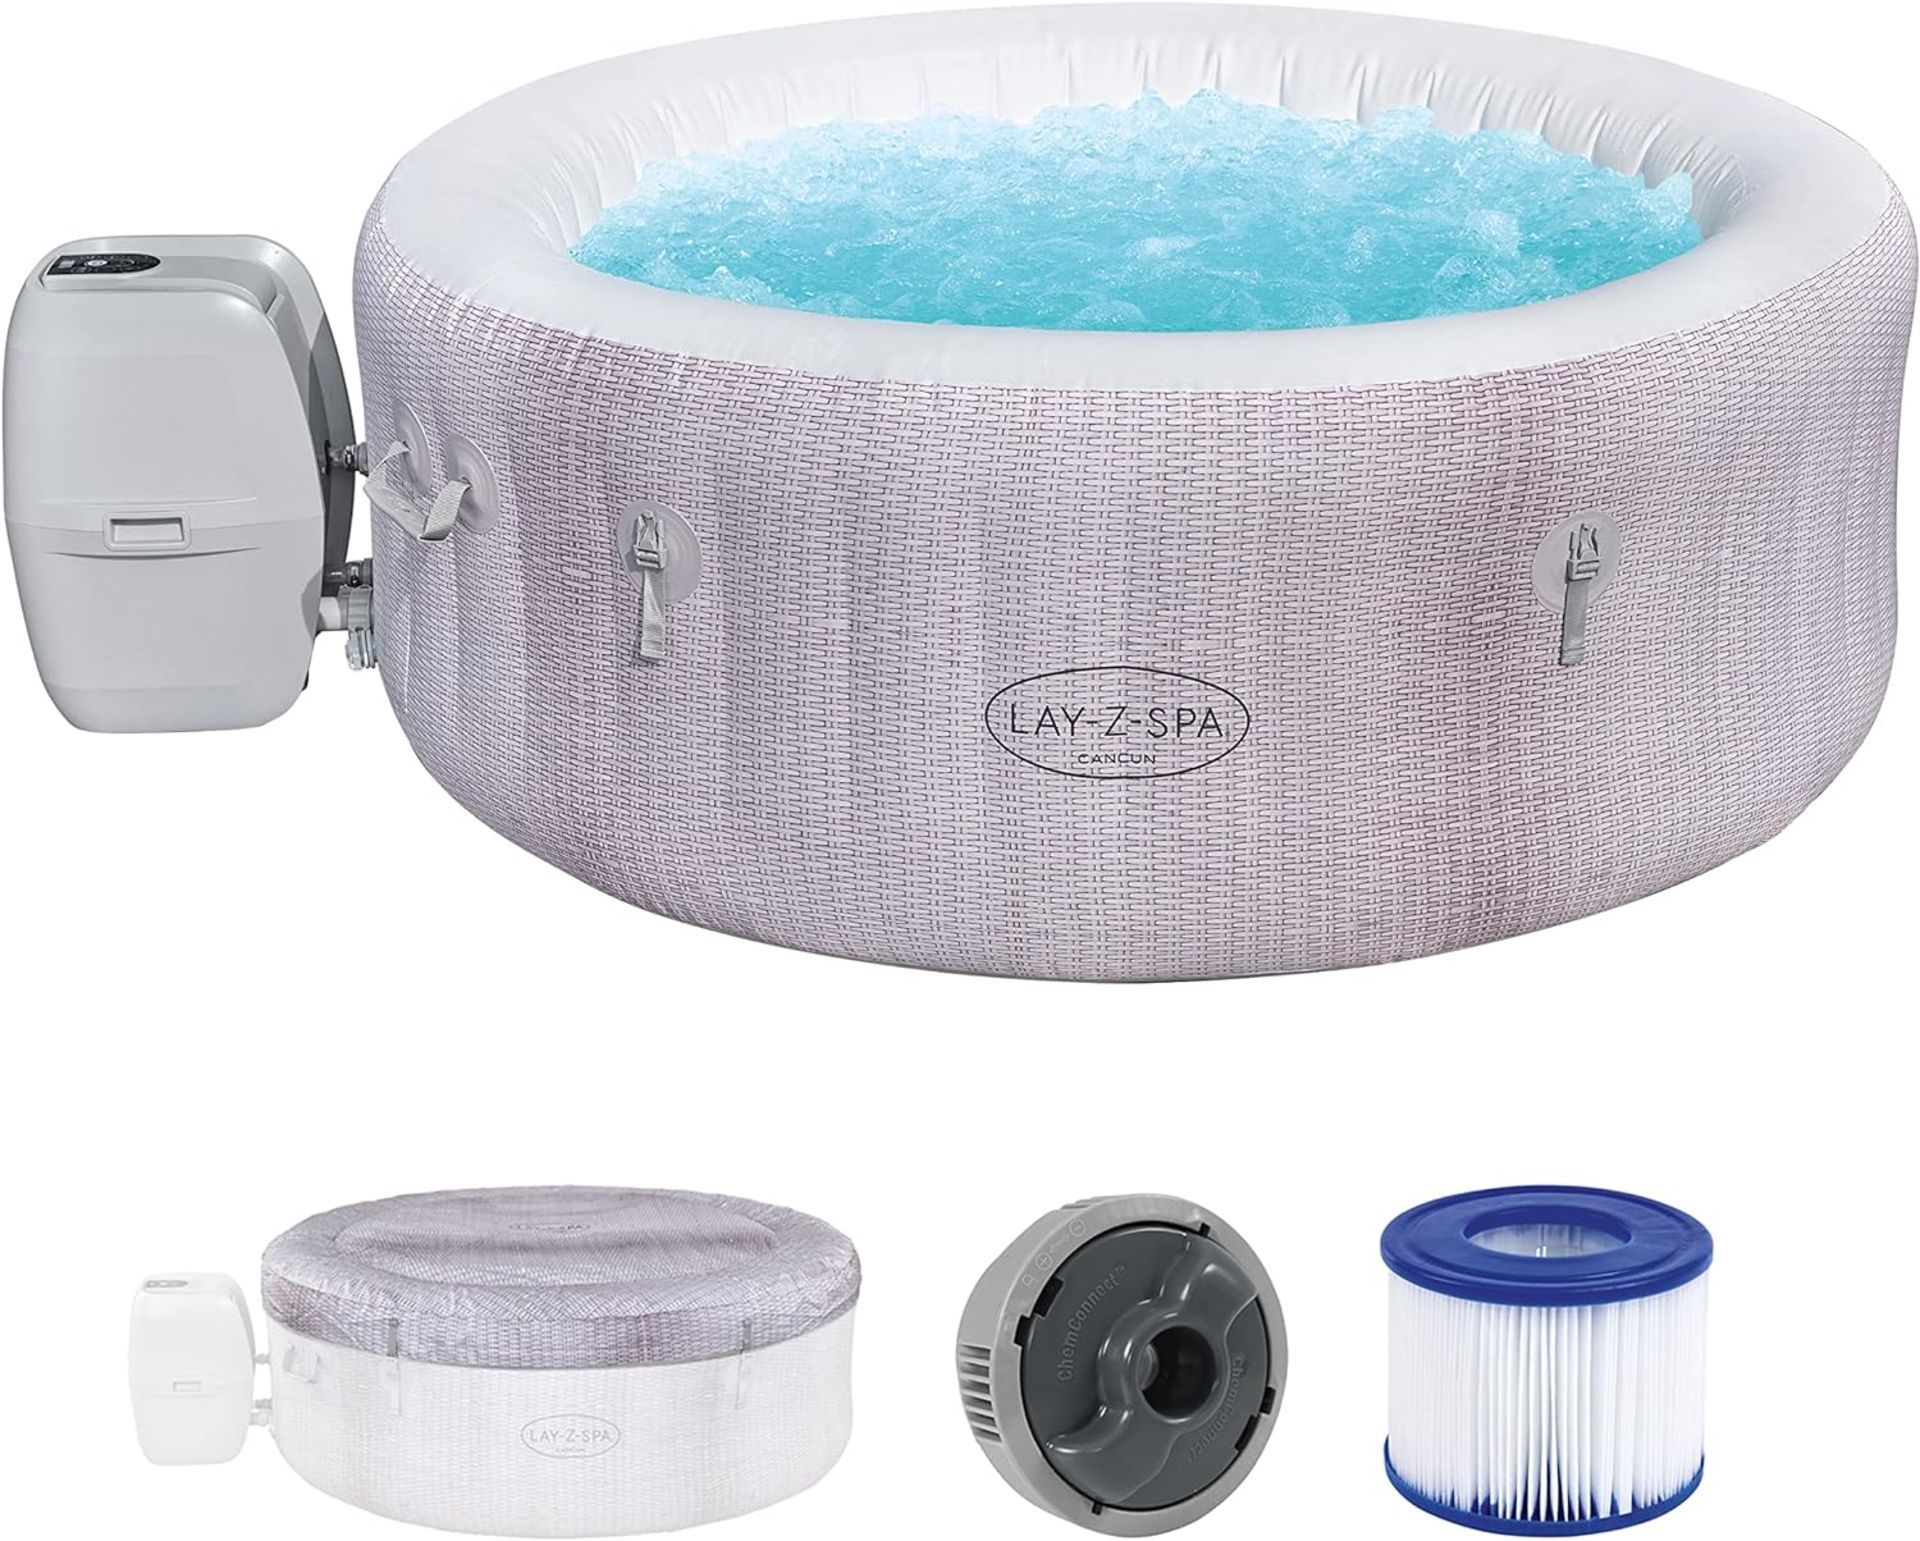 RRP £529.99 - Lay-Z-Spa Cancun Hot Tub, 120 AirJet Rattan Design Inflatable Spa with Freeze Shield - Image 3 of 4